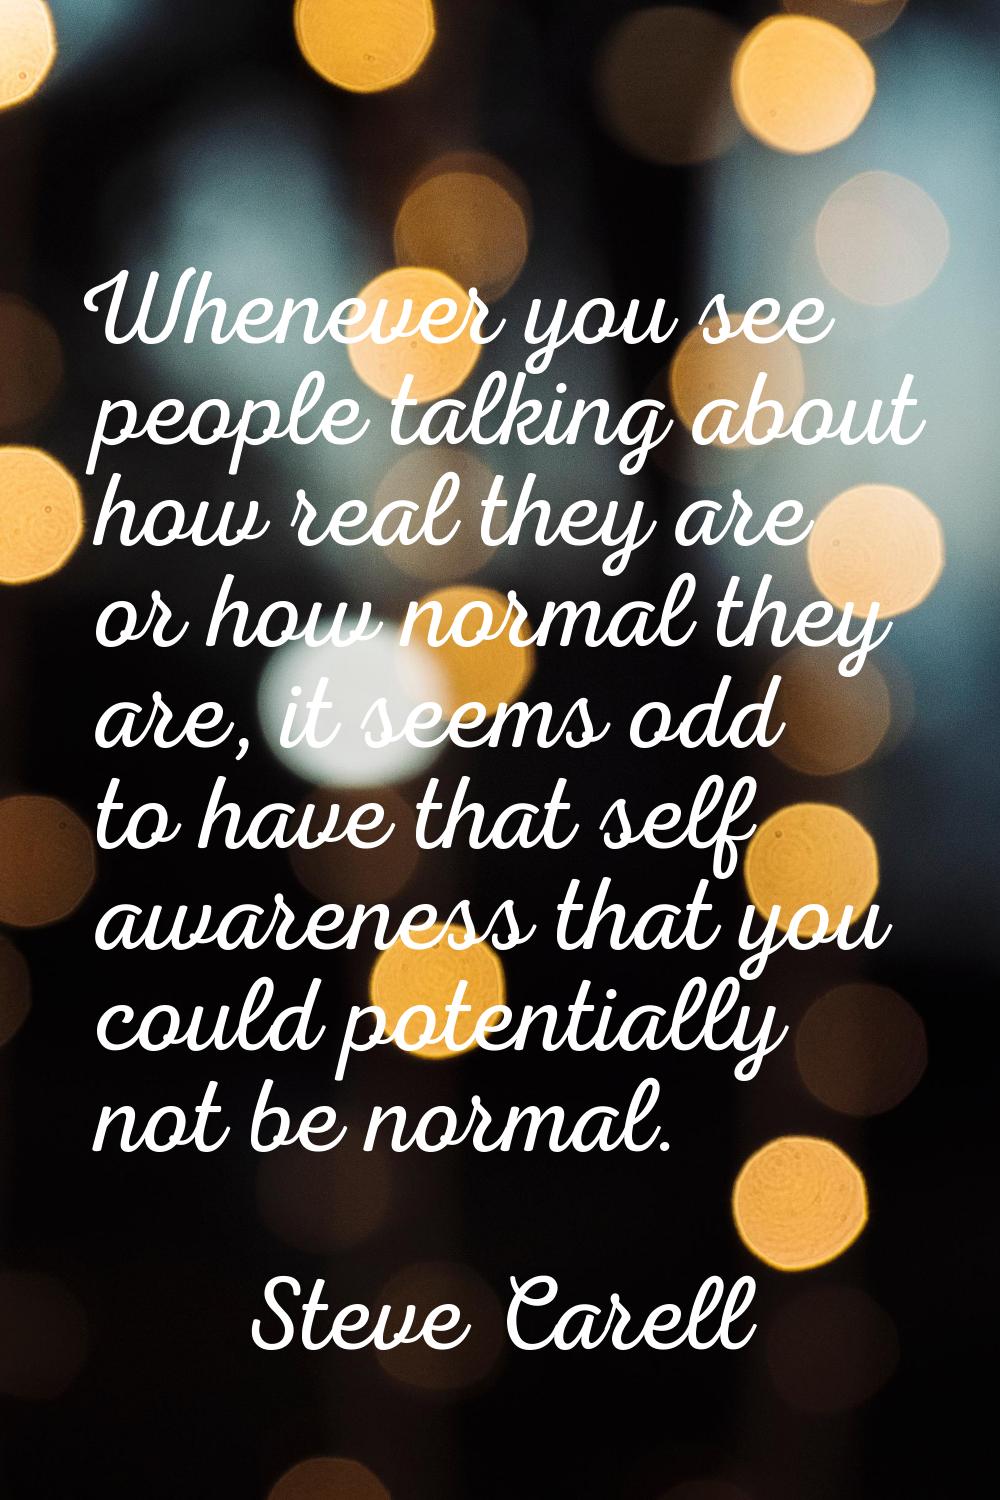 Whenever you see people talking about how real they are or how normal they are, it seems odd to hav